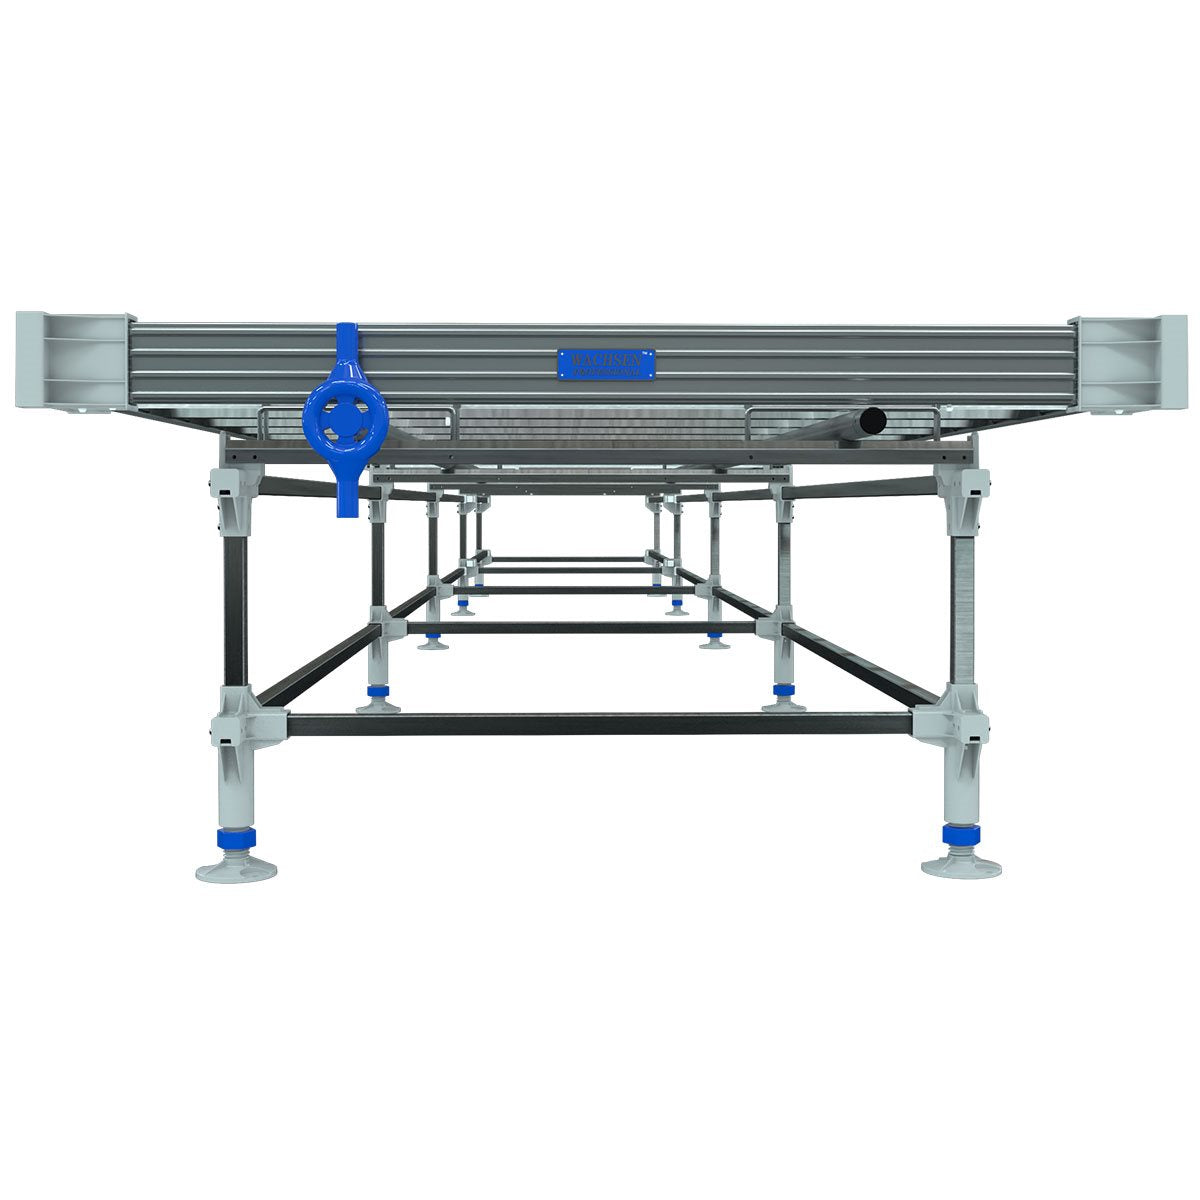 Product Secondary Image:Wachsen Rolling Bench Galvanized 5' Box A